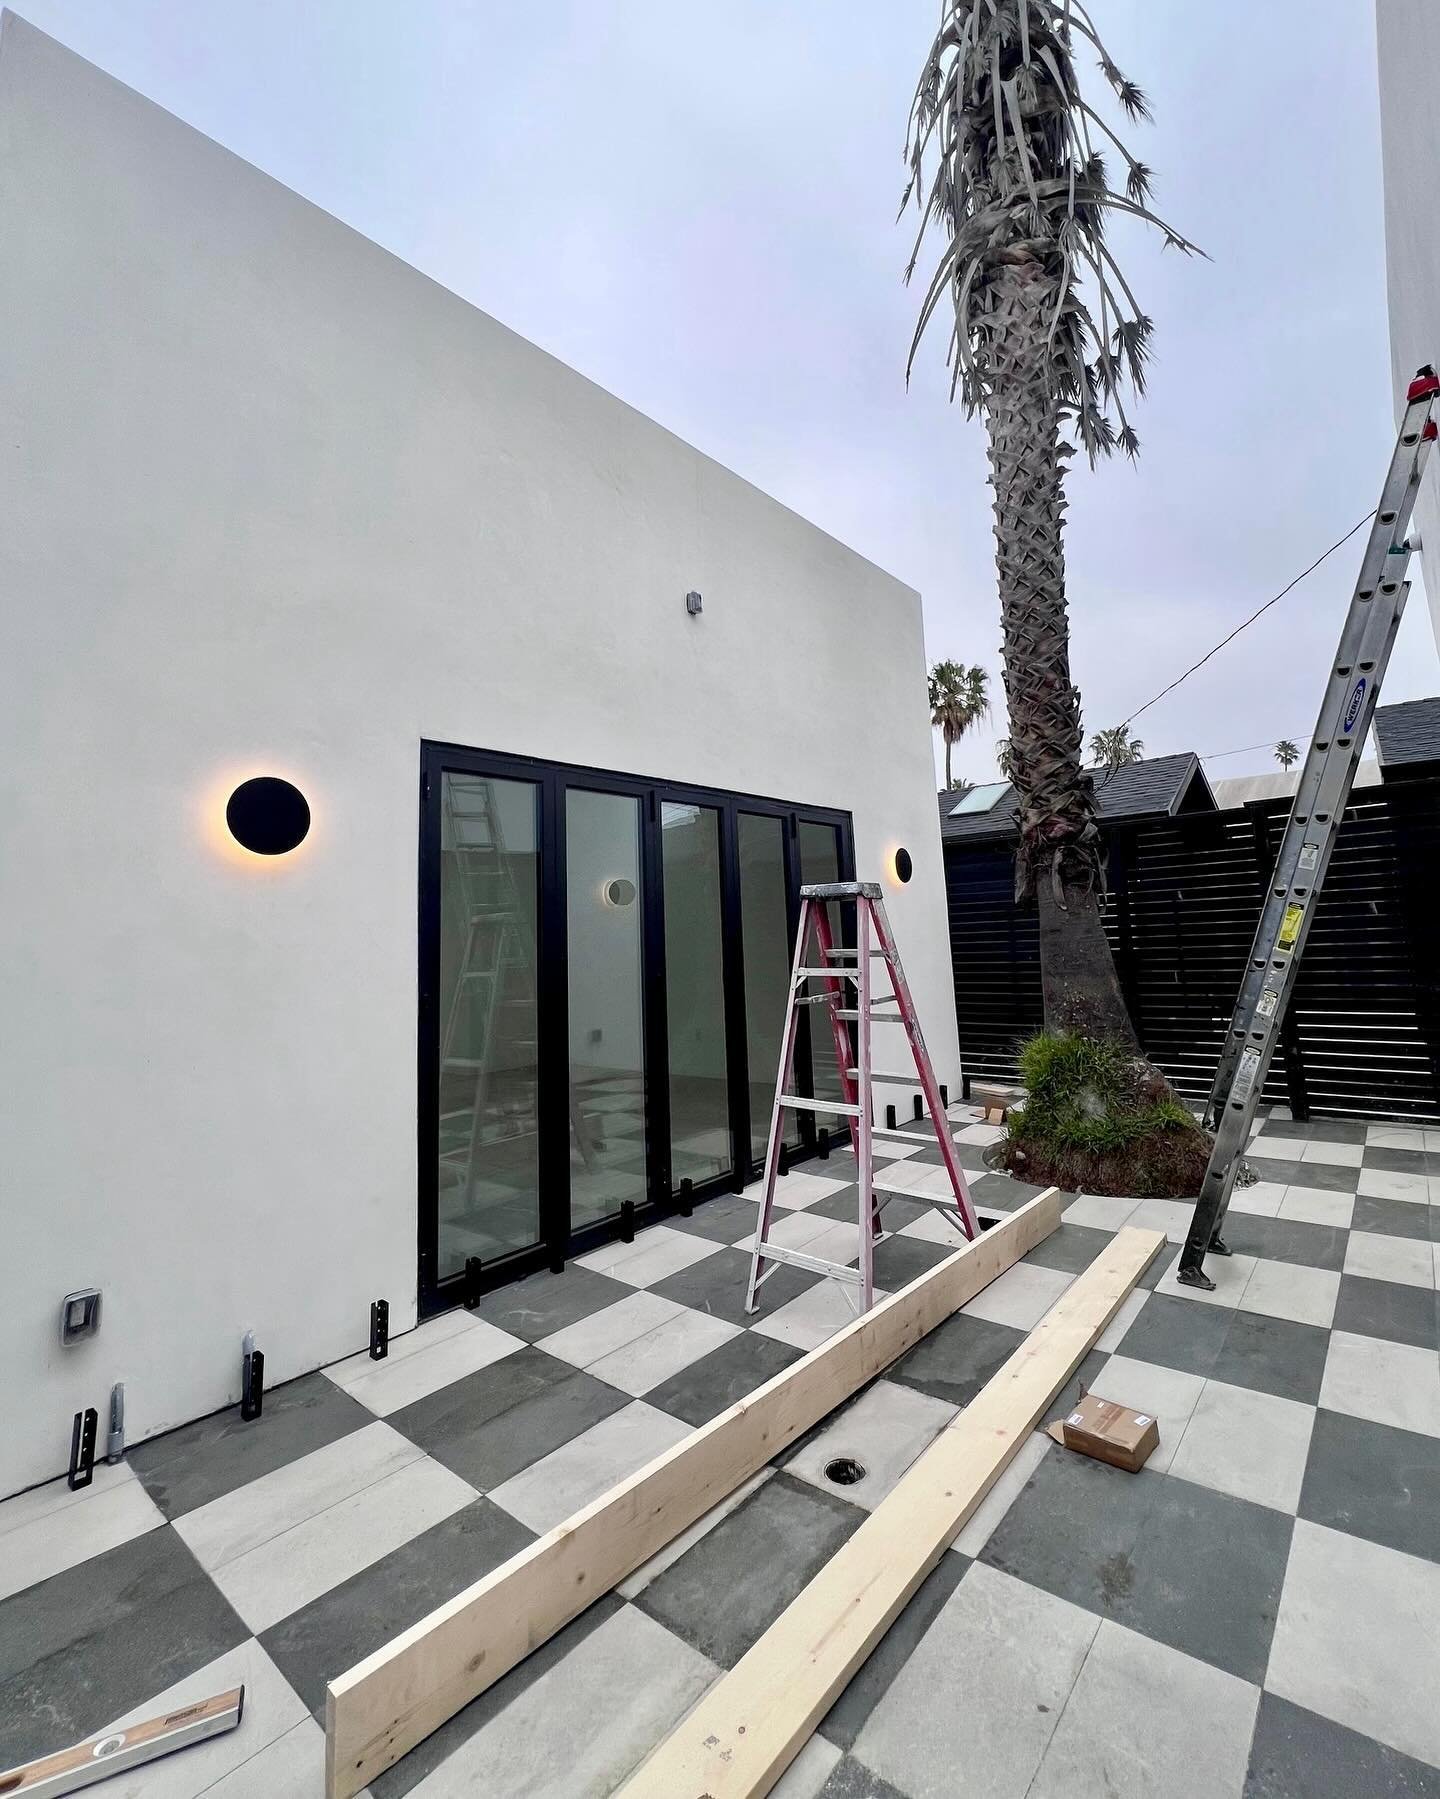 Commercial project almost at the finish line 🏁
Pergola up next 🚀✨

Outdoor flooring sold through our showroom 
 Showroom 💜🌴🪩
▫️1499 Robertson Blvd. 
Los Angeles Ca. 90035

www.jojodesignstudio.com